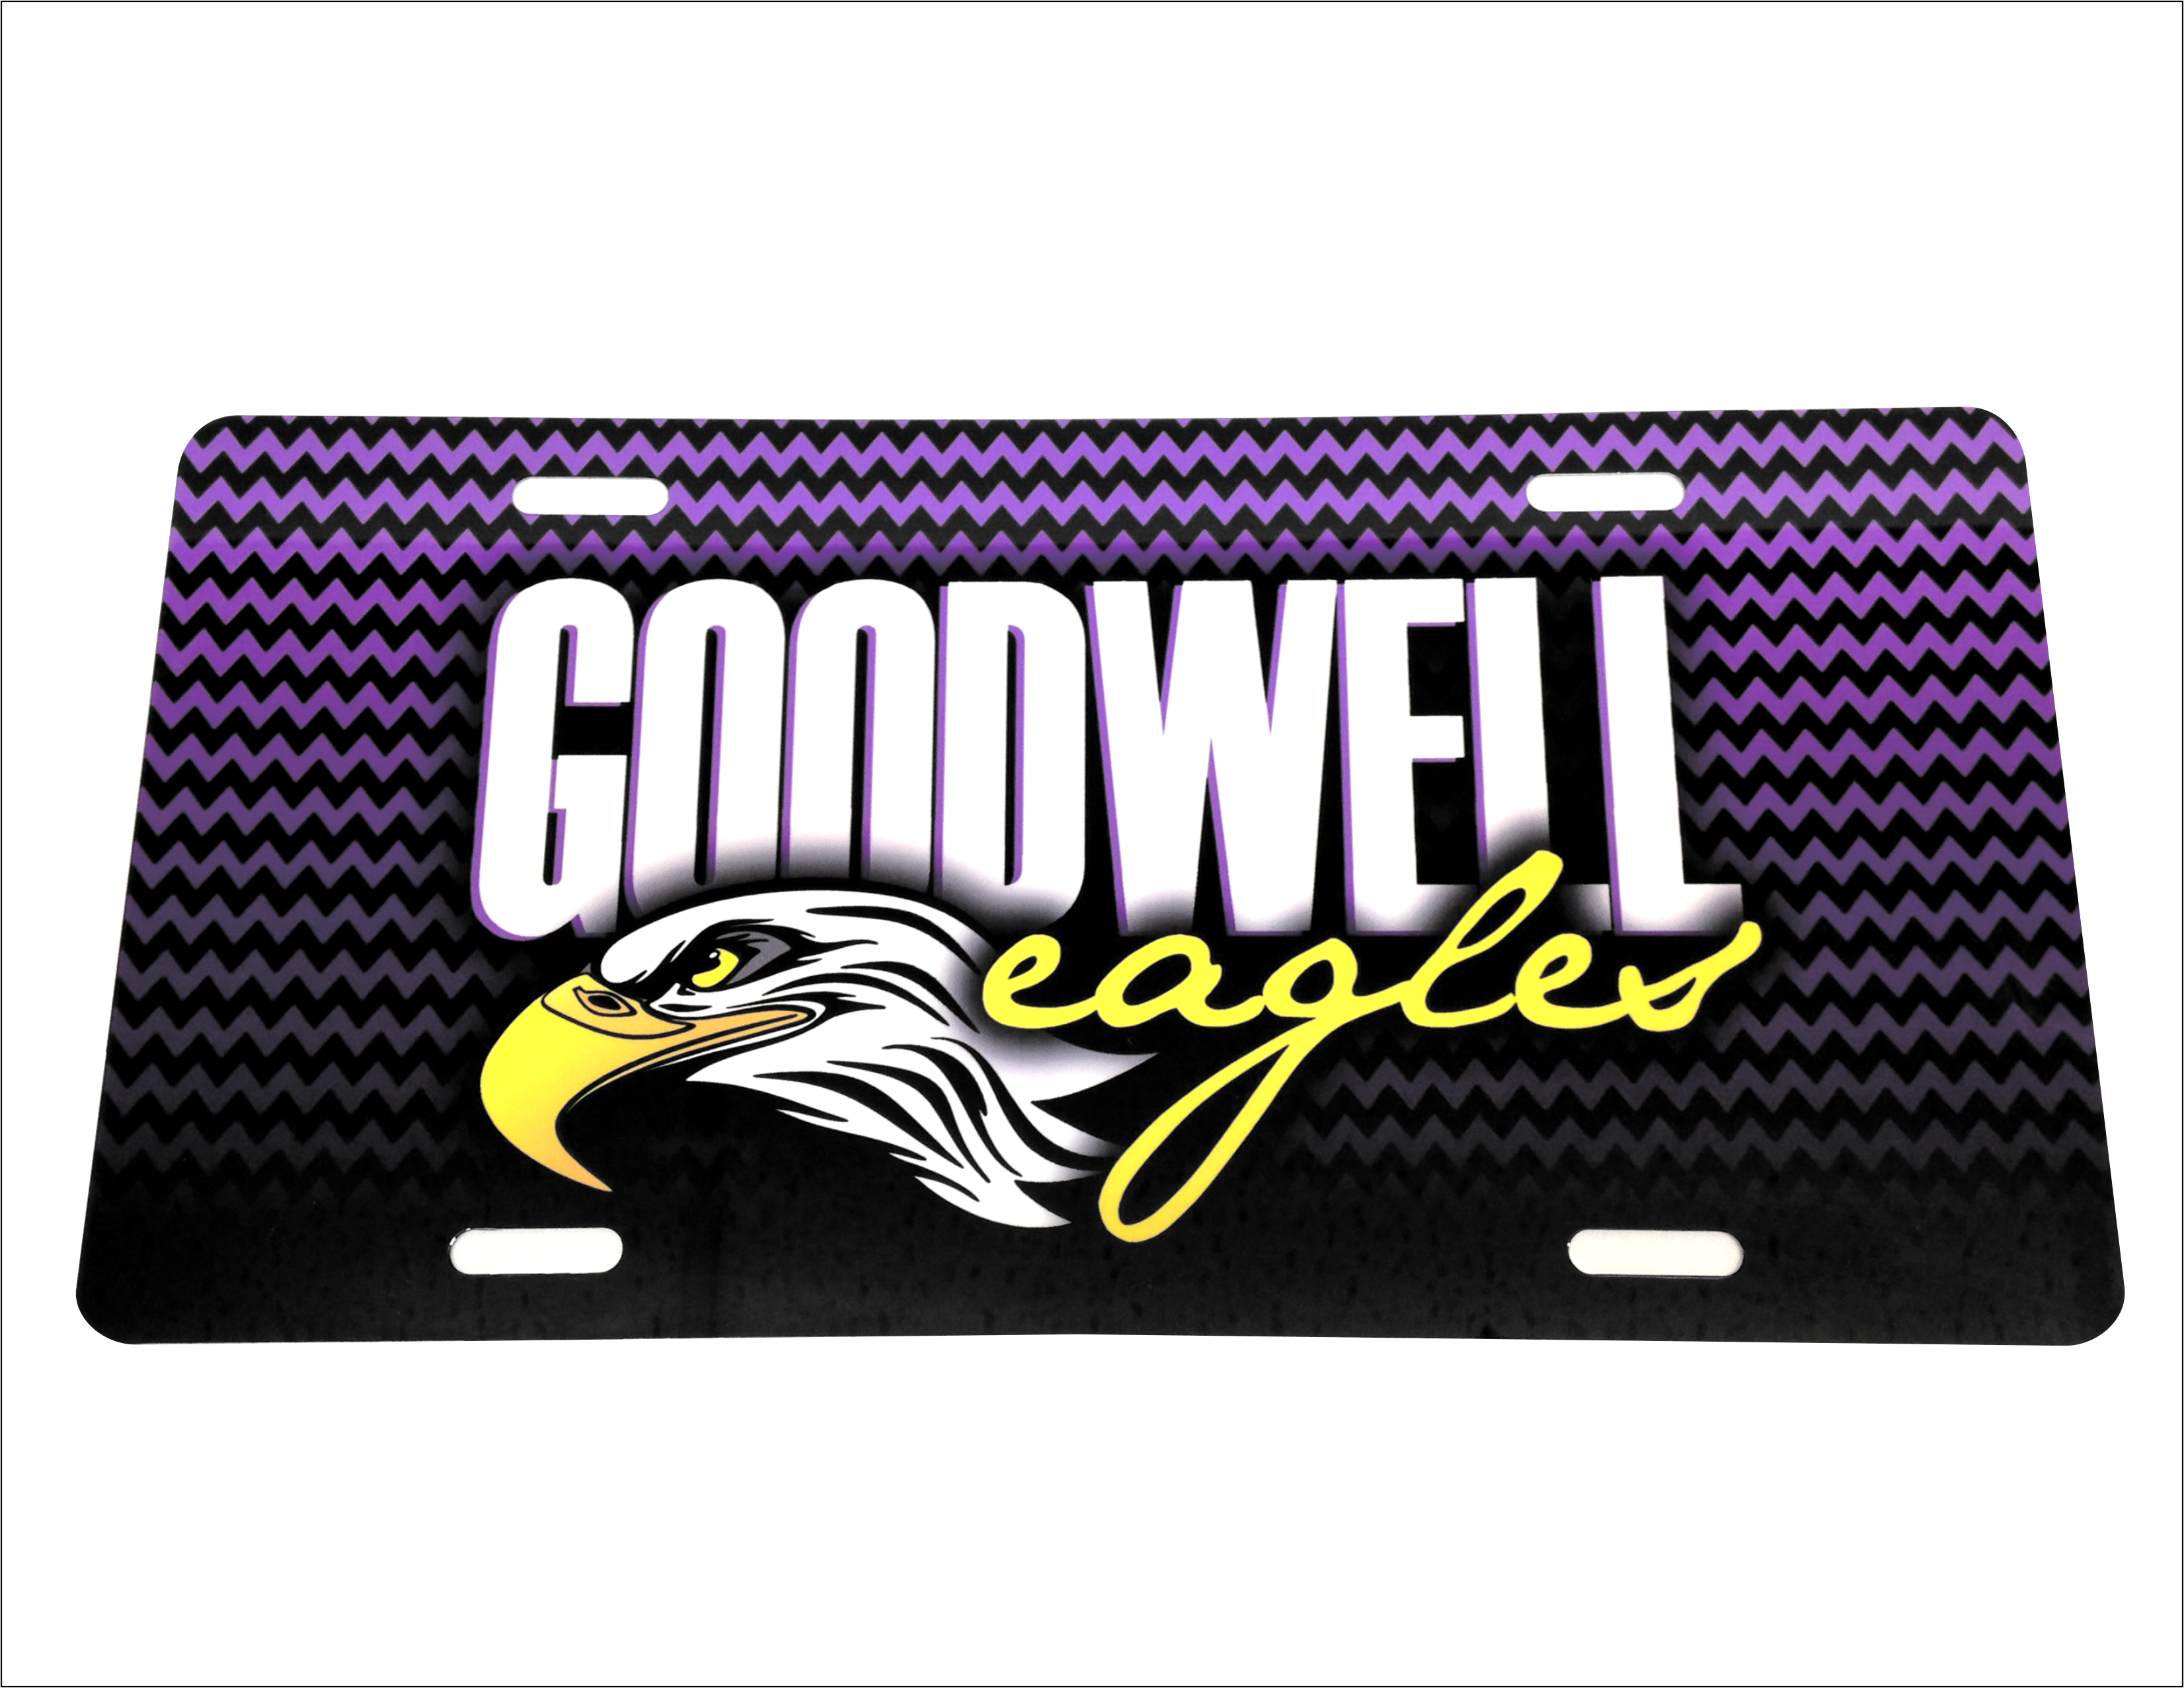 Eagle License Plate made with sublimation printing